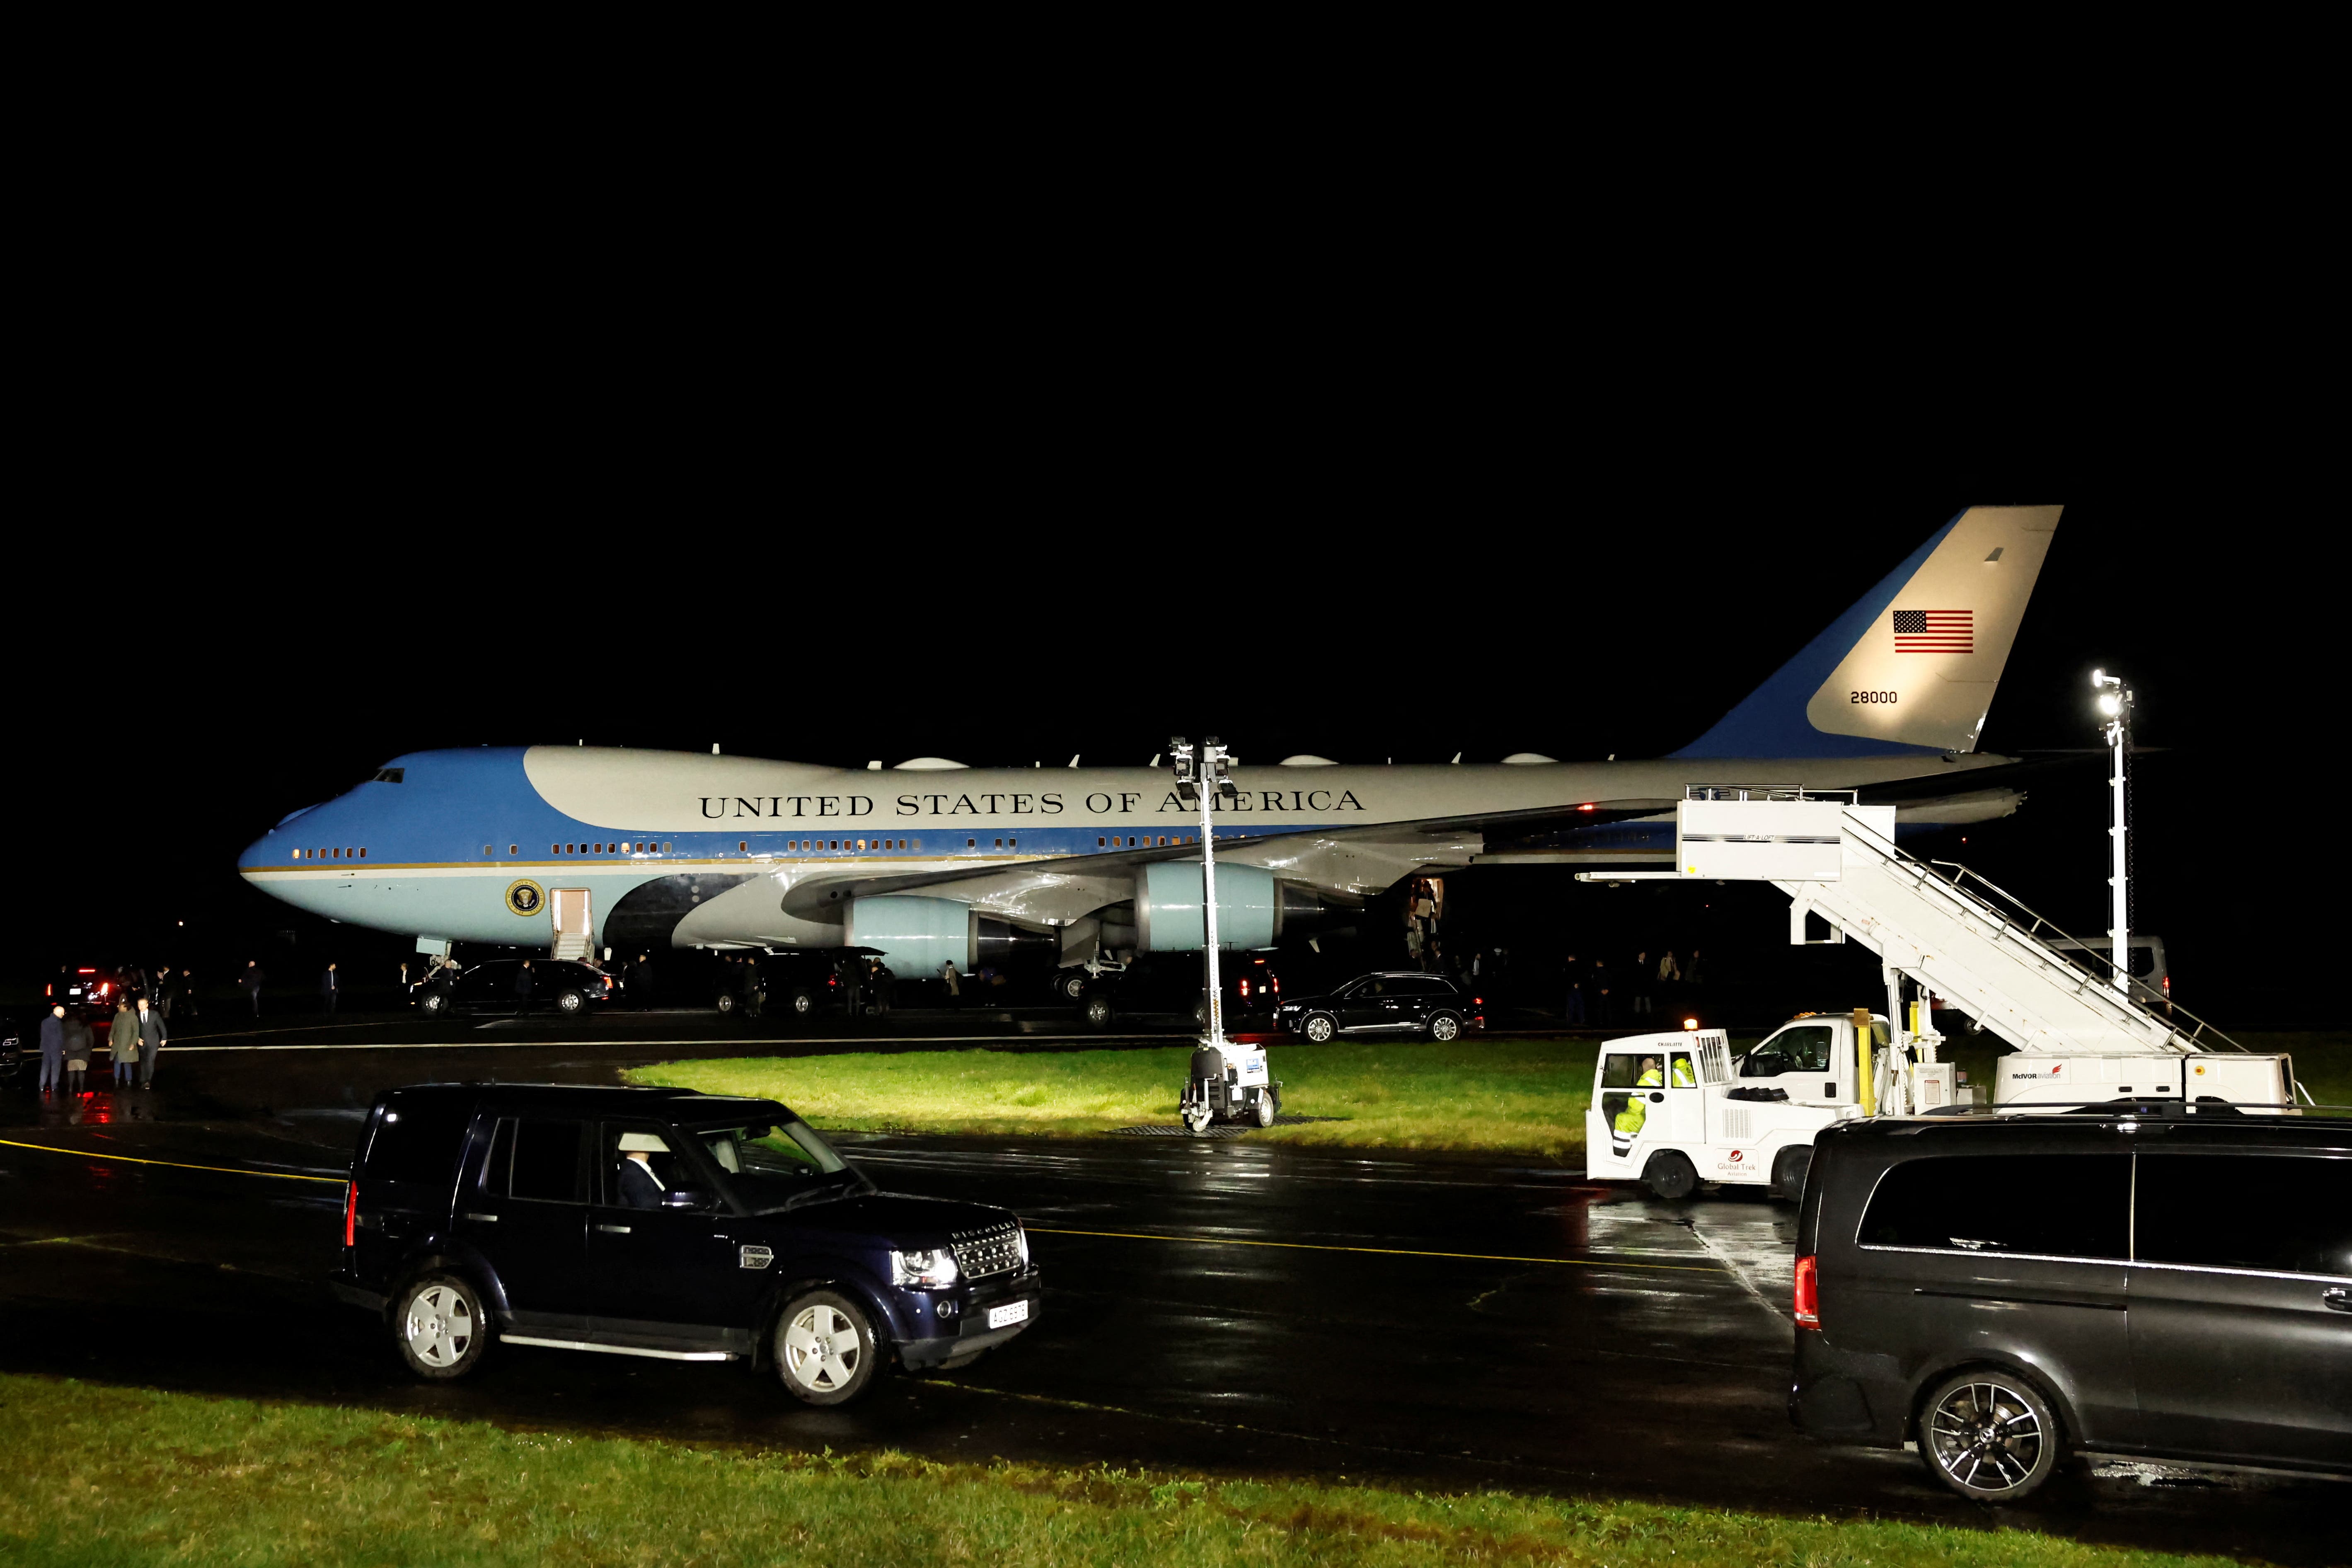 Mr Biden touched down at RAF Aldergrove on Air Force One